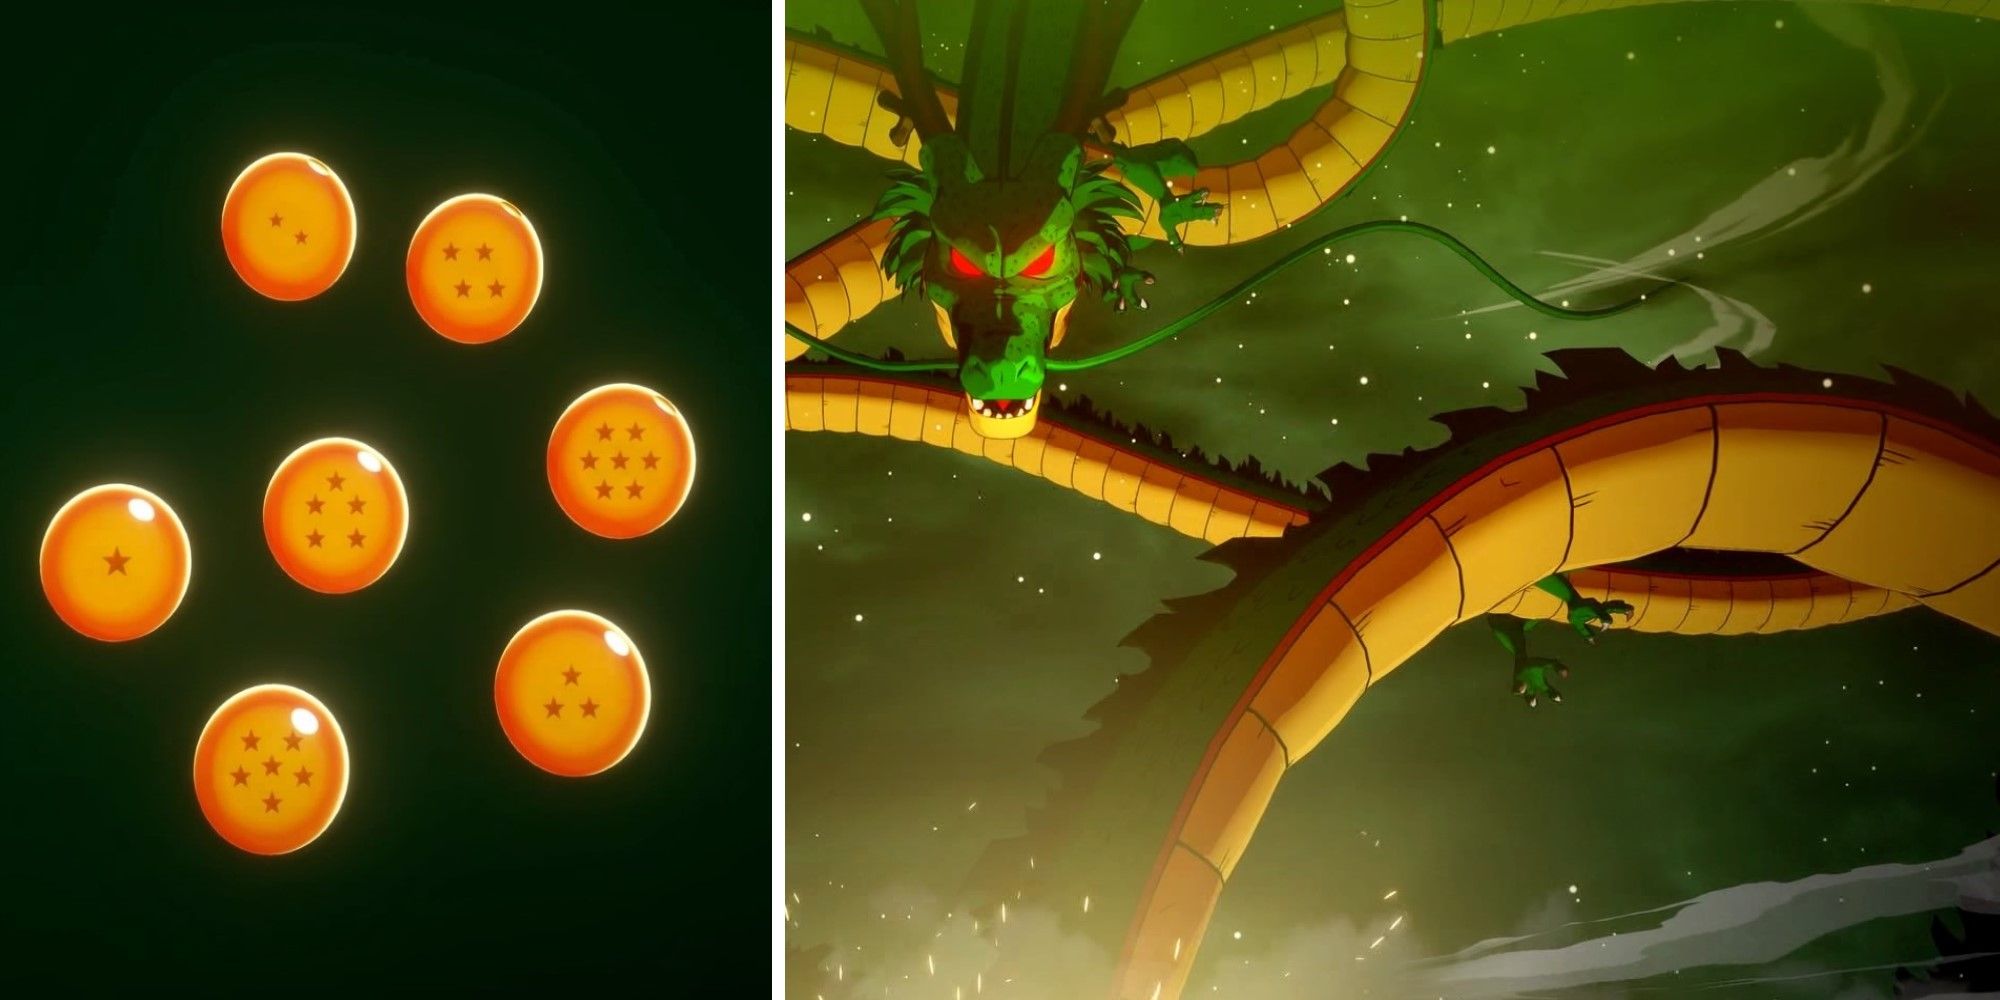 Dragon Ball Z: Kakarot Will Allow You to Summon Shenron and Fight